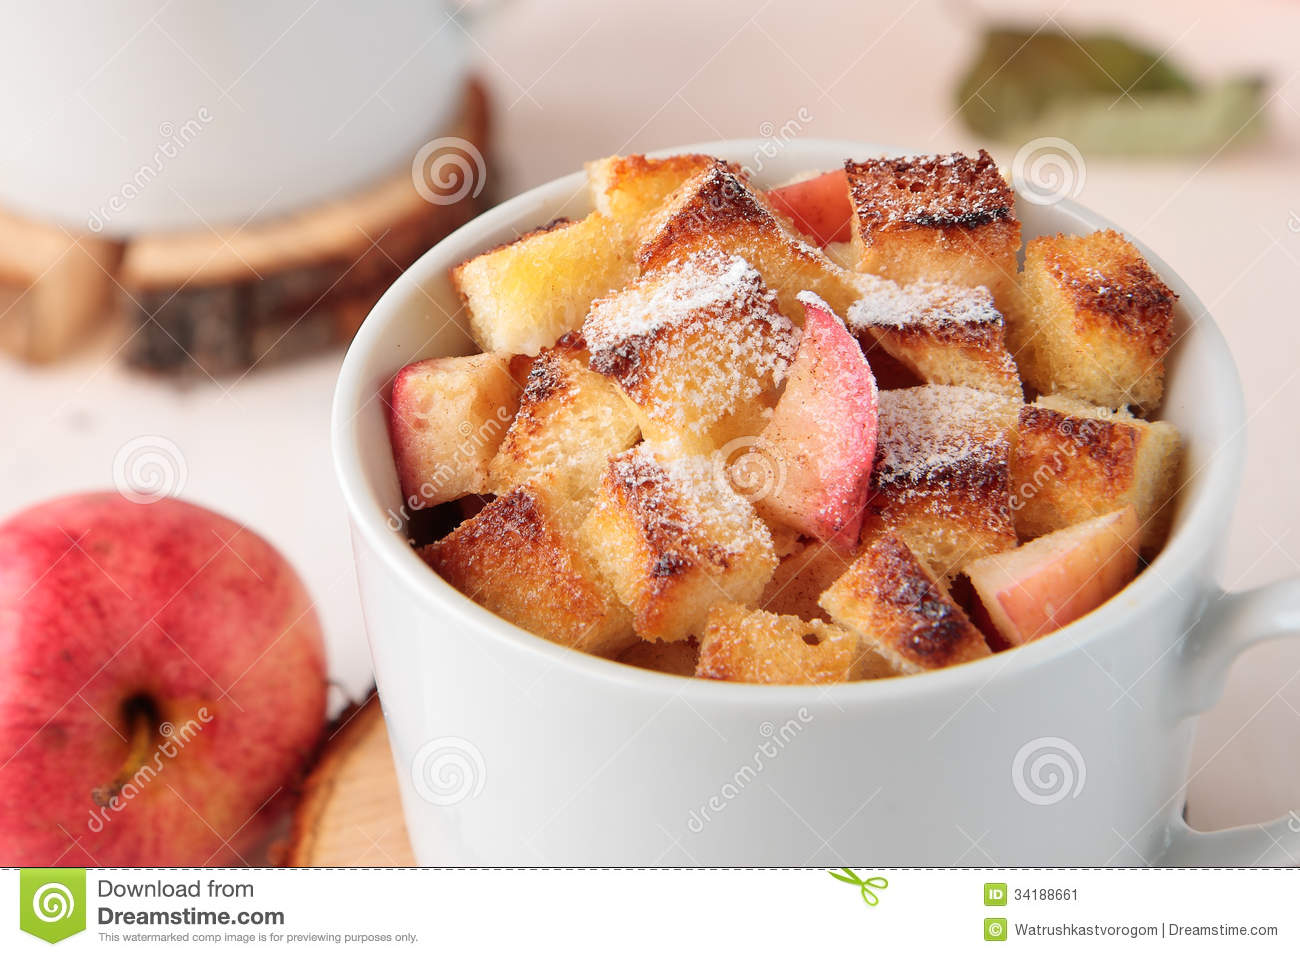 Cup Of White Bread Pudding With Apples Stock Image   Image  34188661